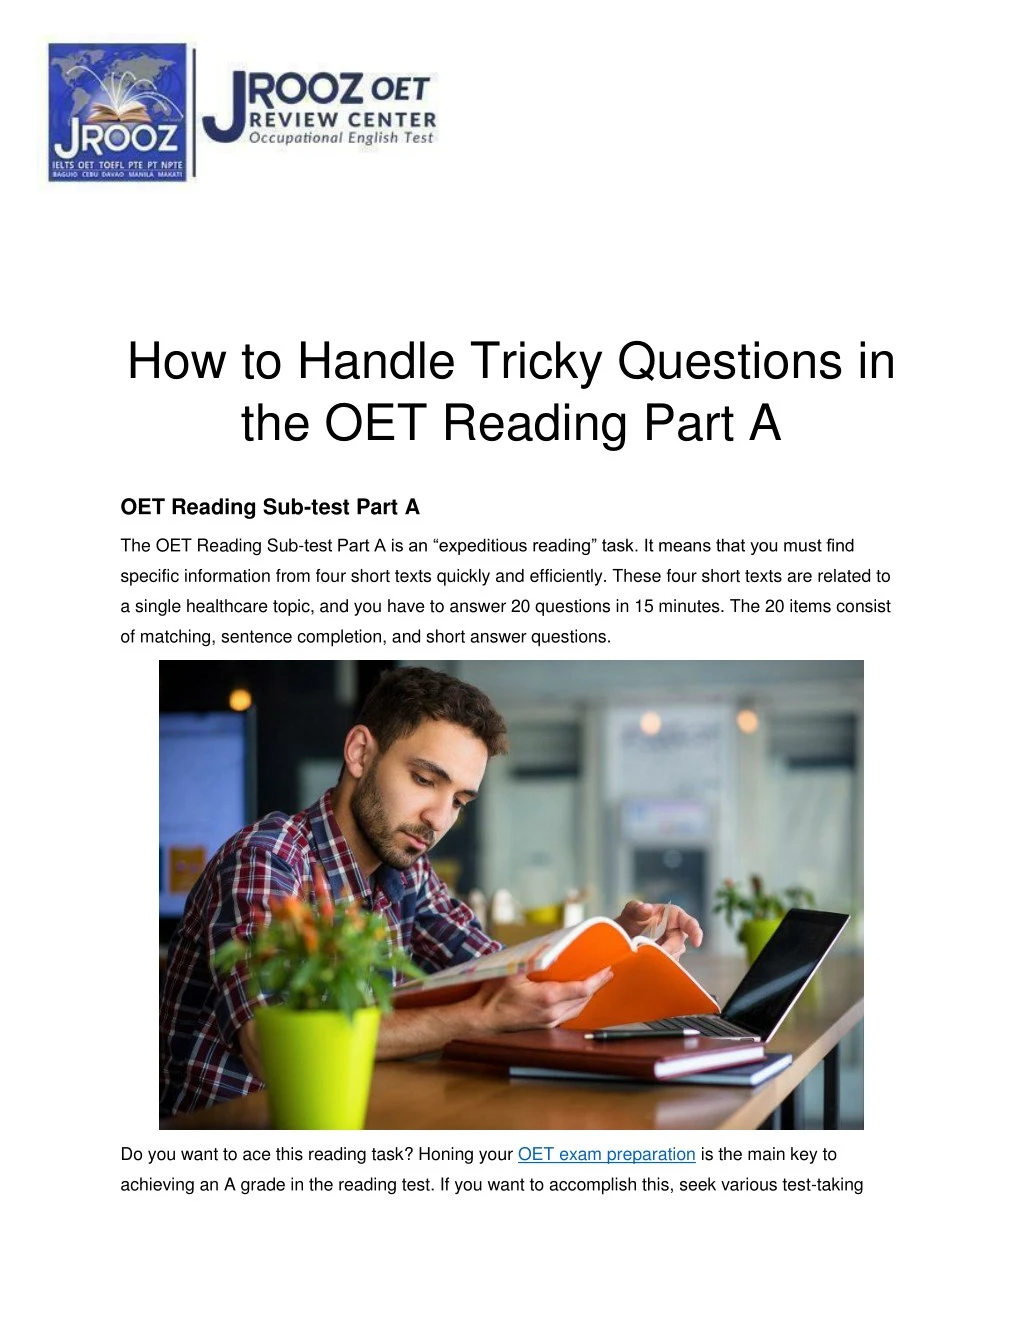 how to handle tricky questions in the oet reading